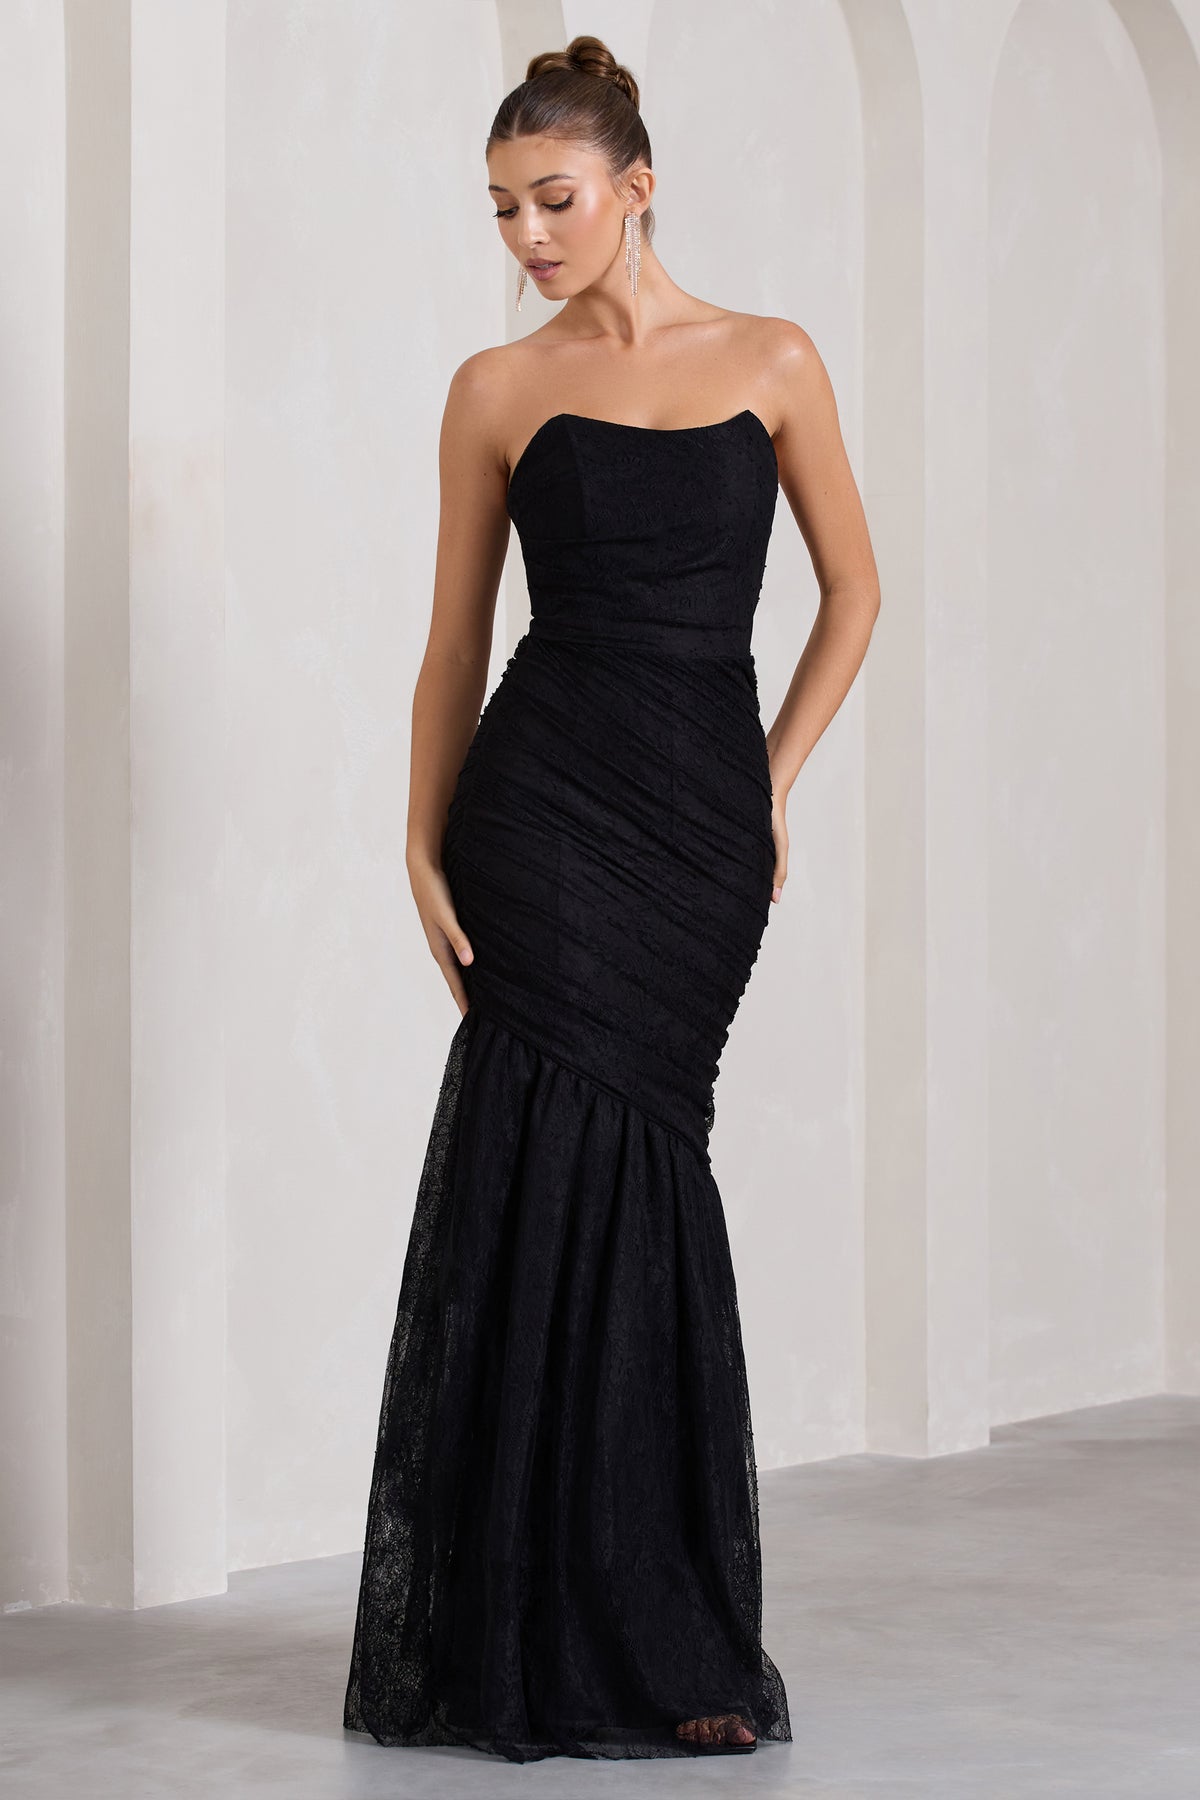 Encapsulate Black Lace Ruched Strapless Fishtail Maxi Dress – Club